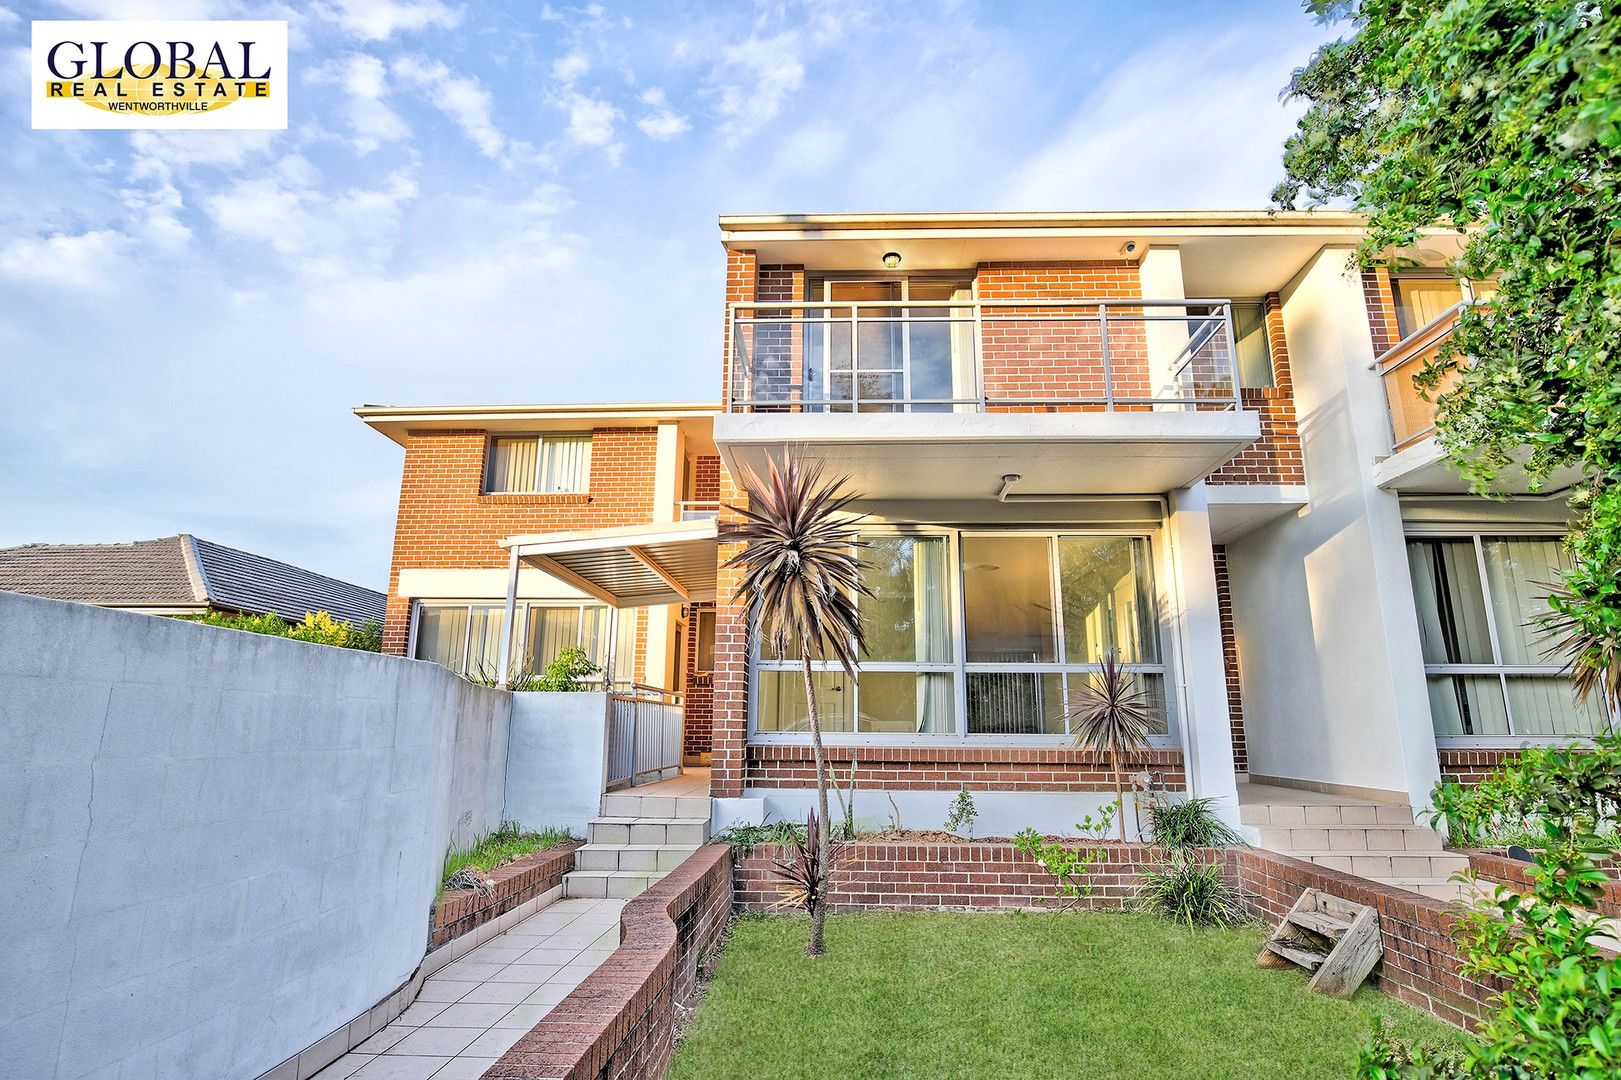 22-24 Water St, Wentworthville NSW 2145, Image 0